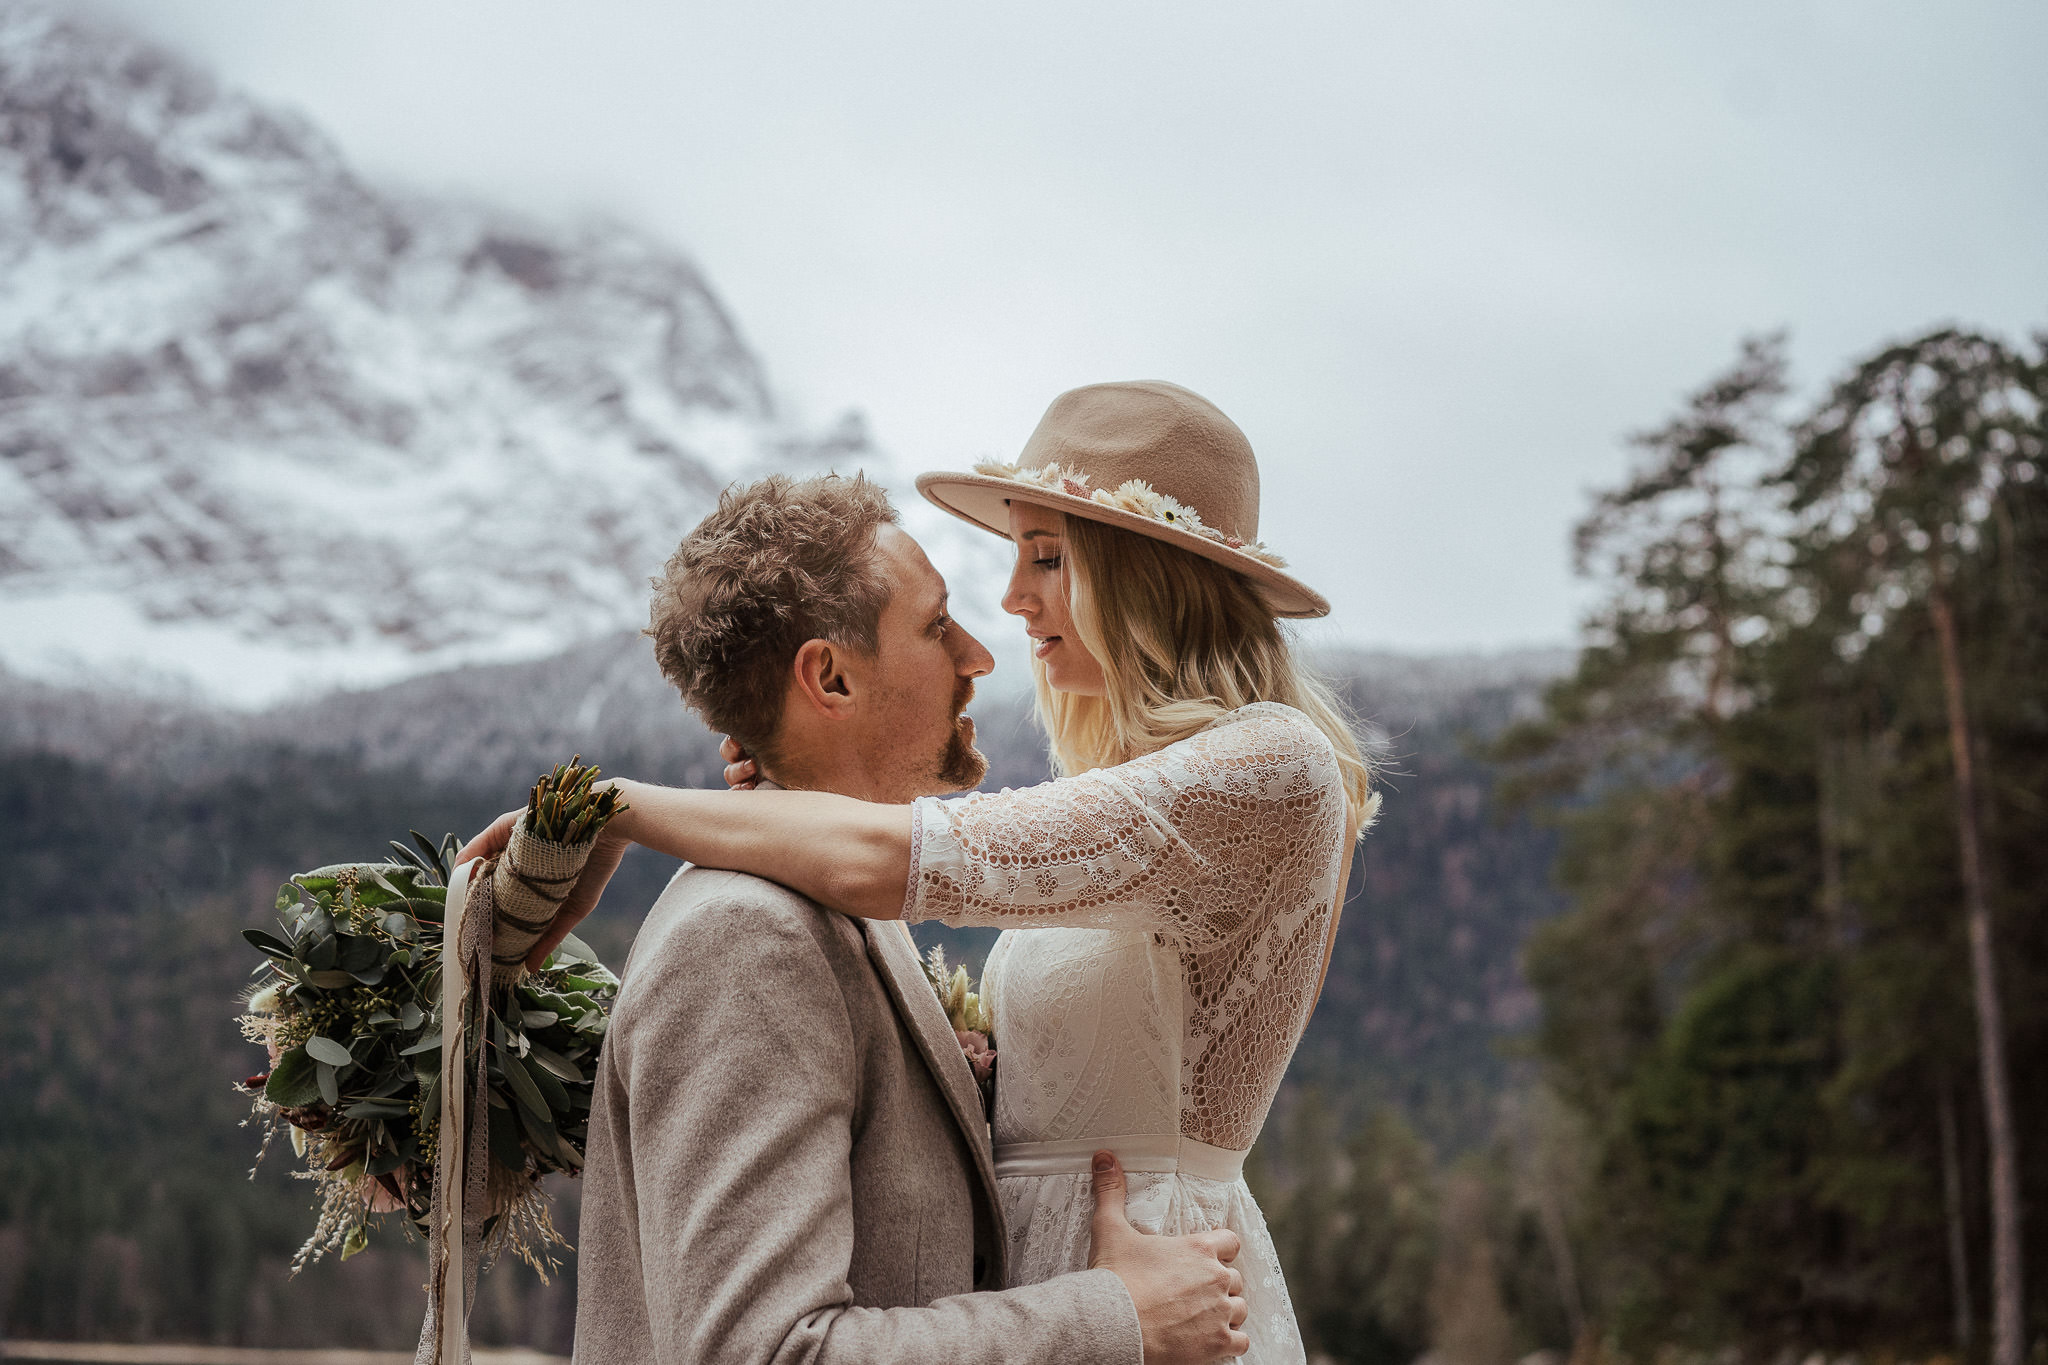 After Wedding Shooting in the Mountains by Julia Wahn